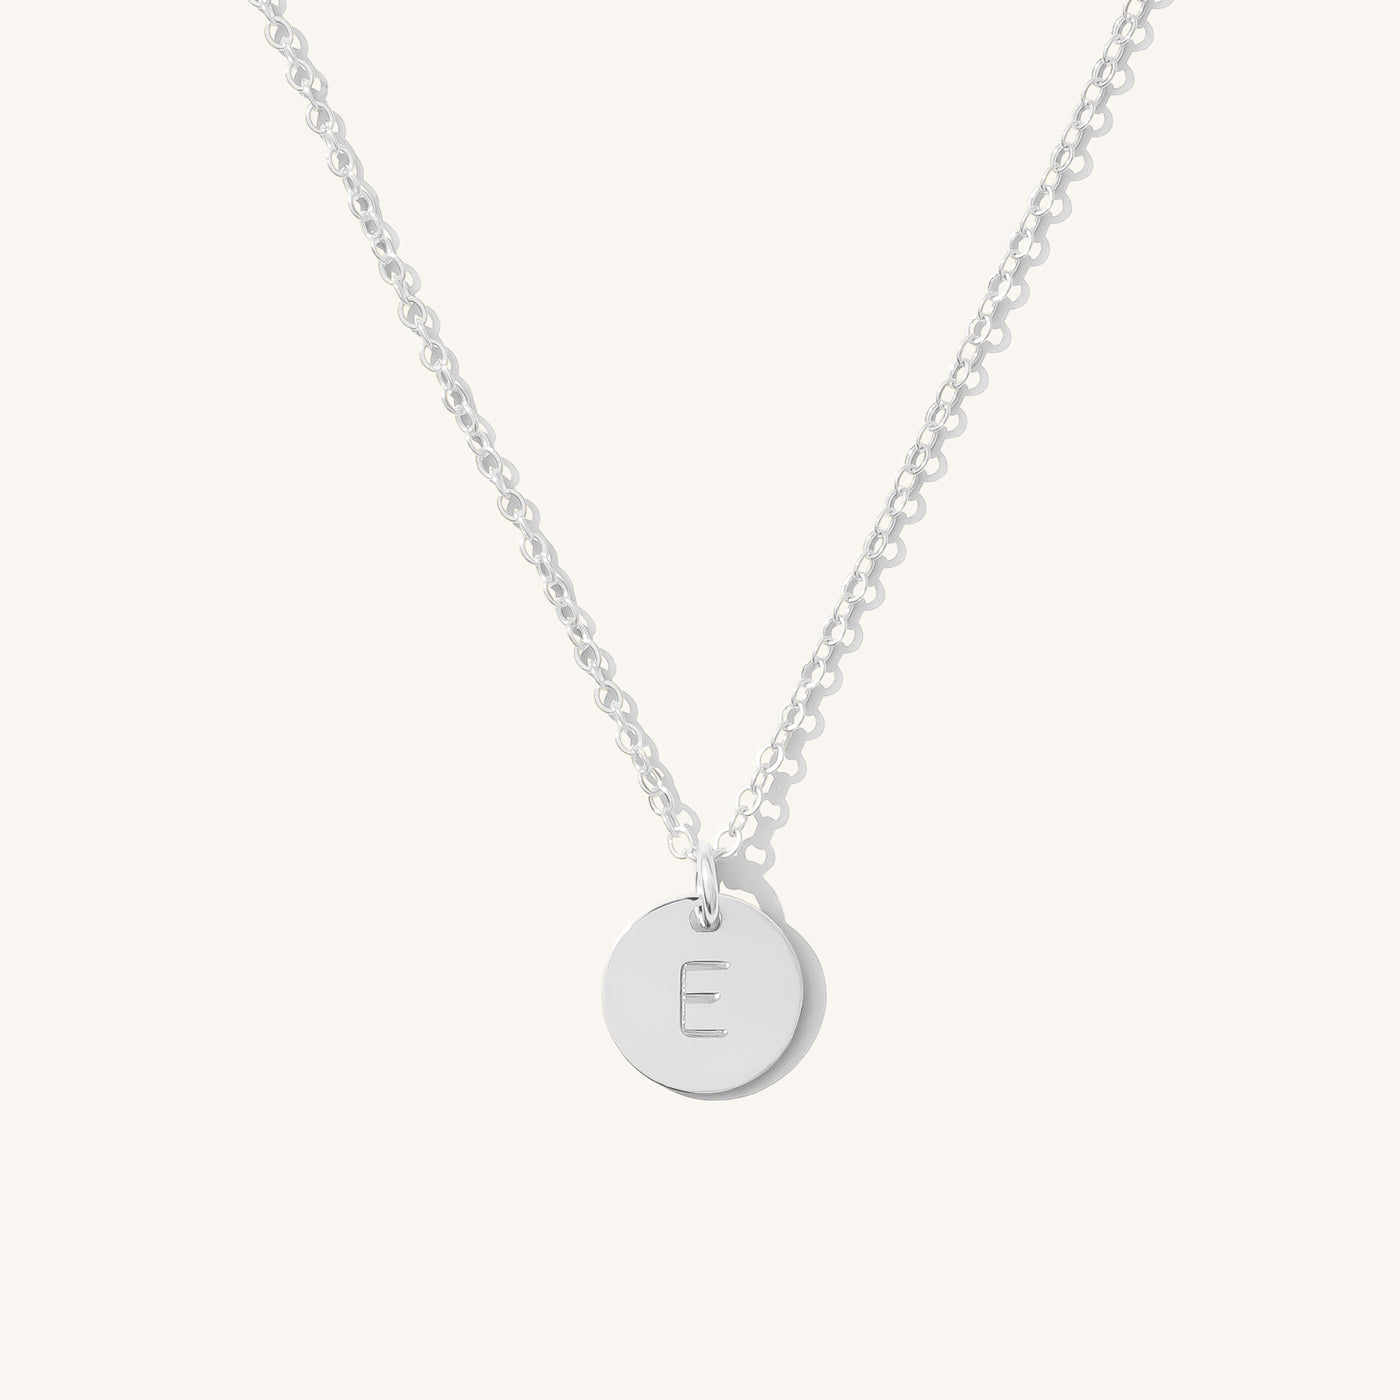 E Dainty Initial Necklace